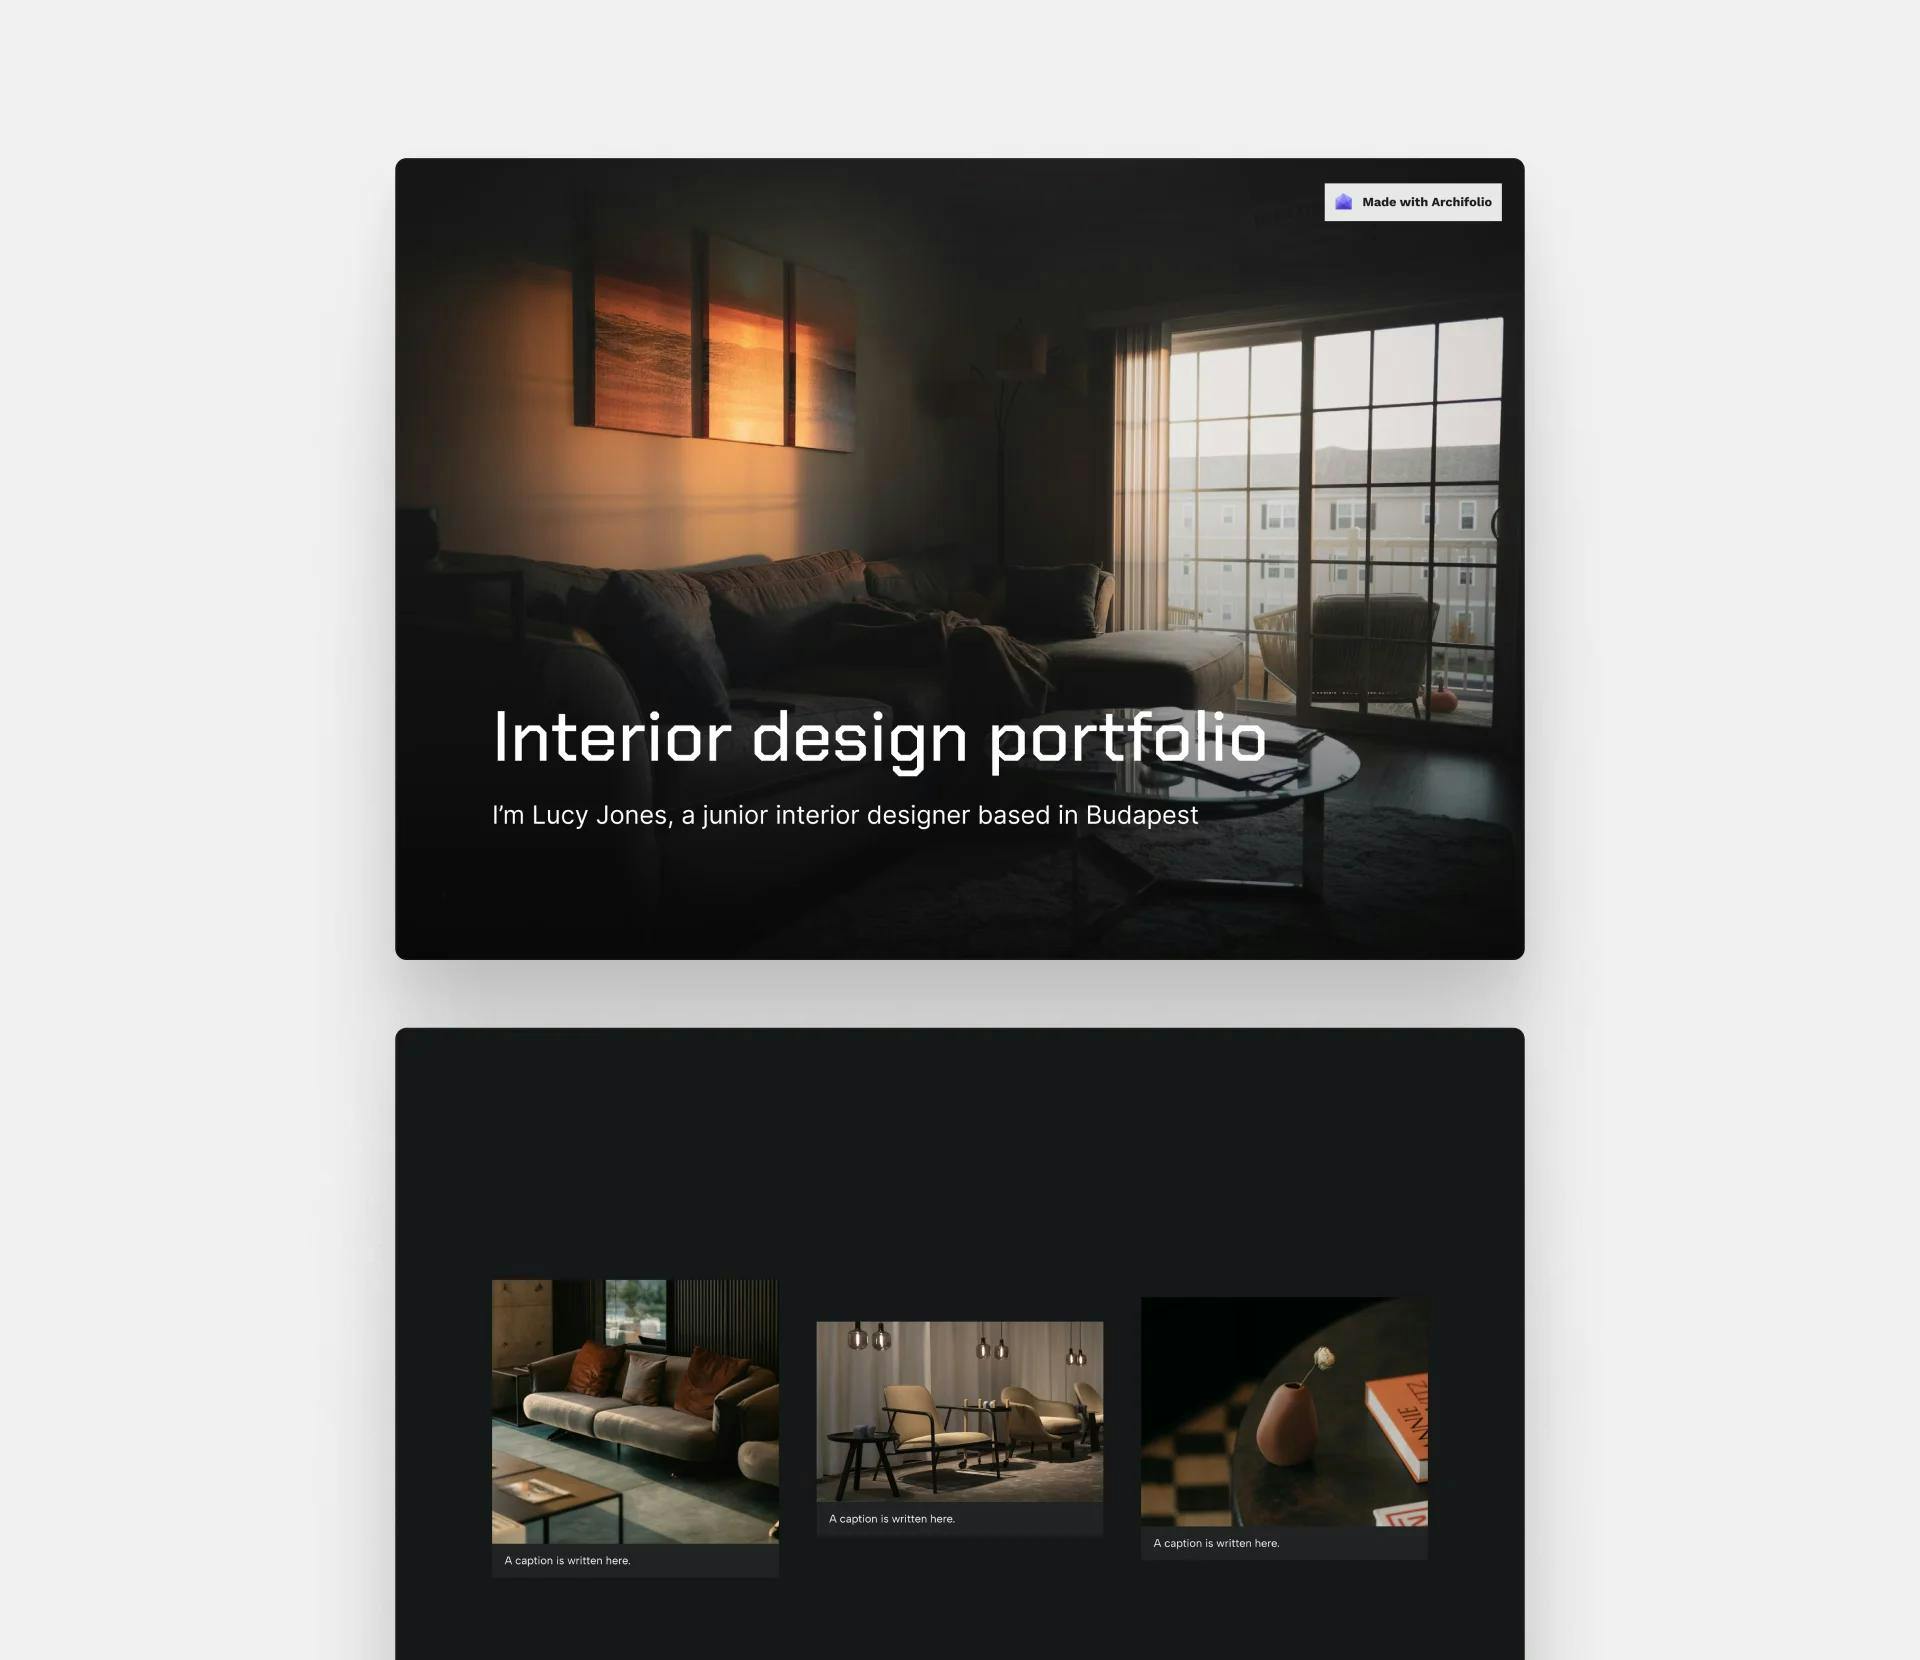 A preview of two pages of the Museum template exported as a PDF. The pages have a dark background and moody images of interiors.